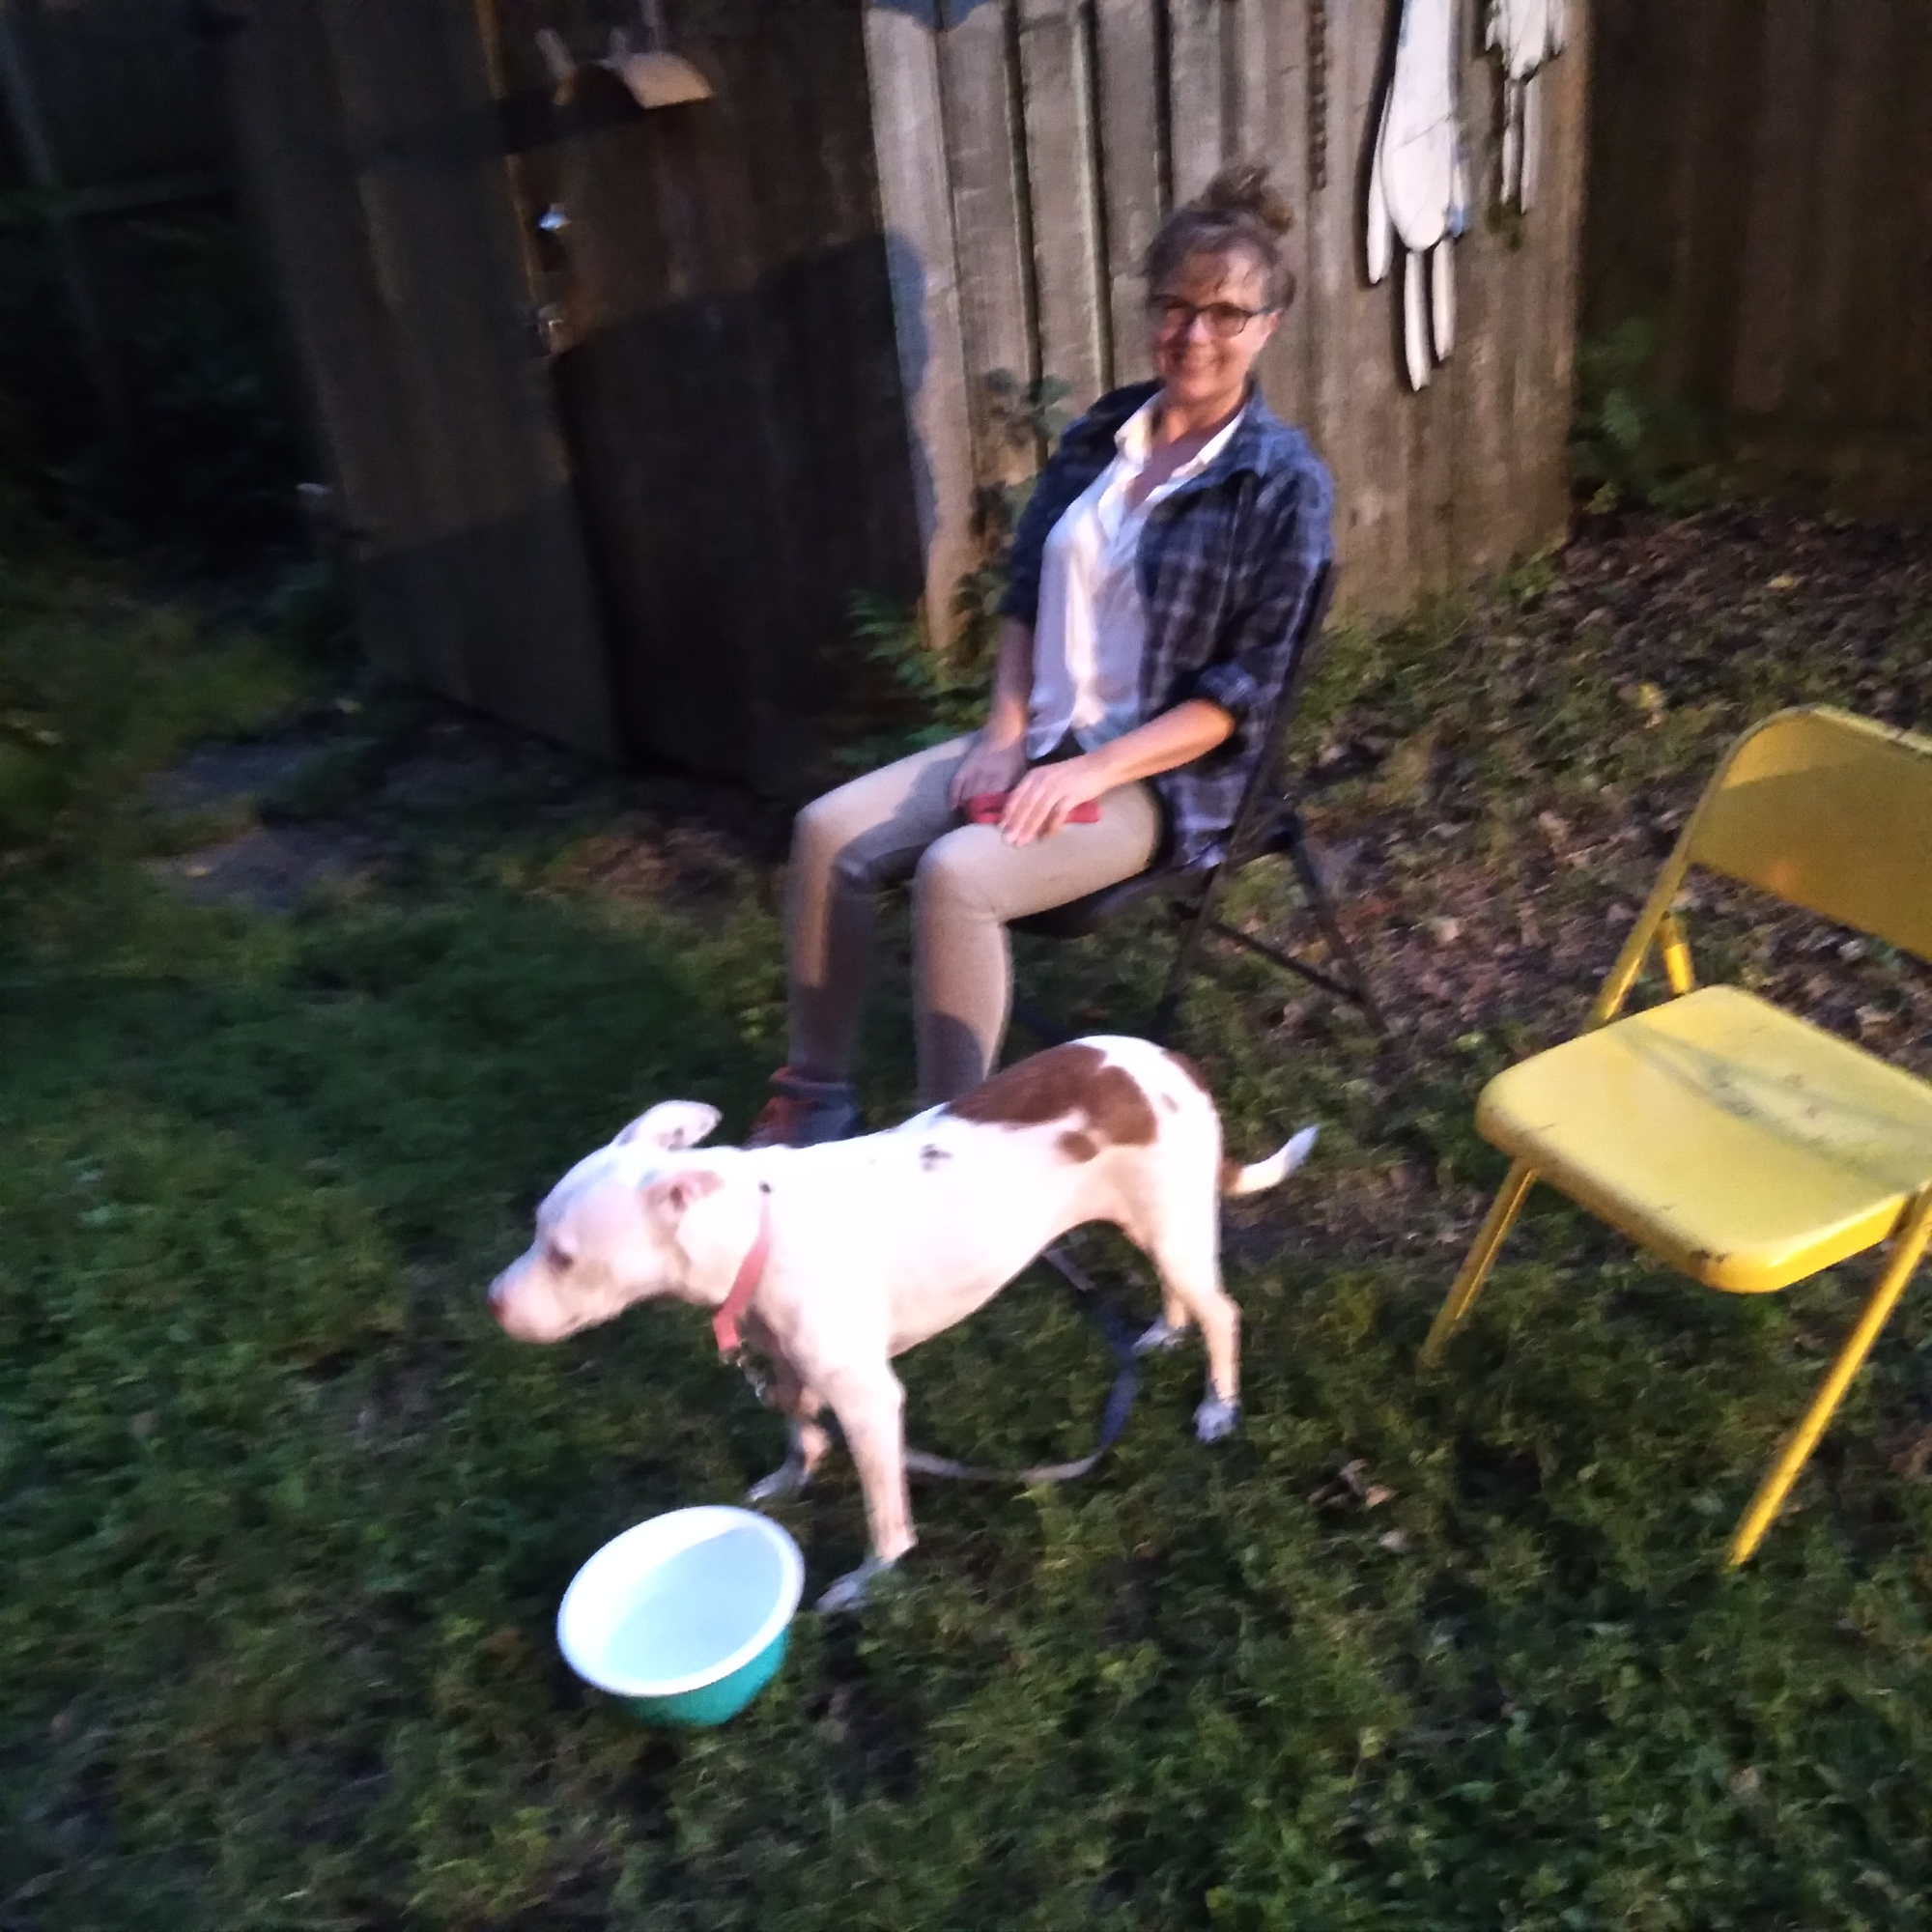 Gina Phillips and Daisy the dog at a bonfire, Tricou Stret, New Orleans, September 27, 2021.